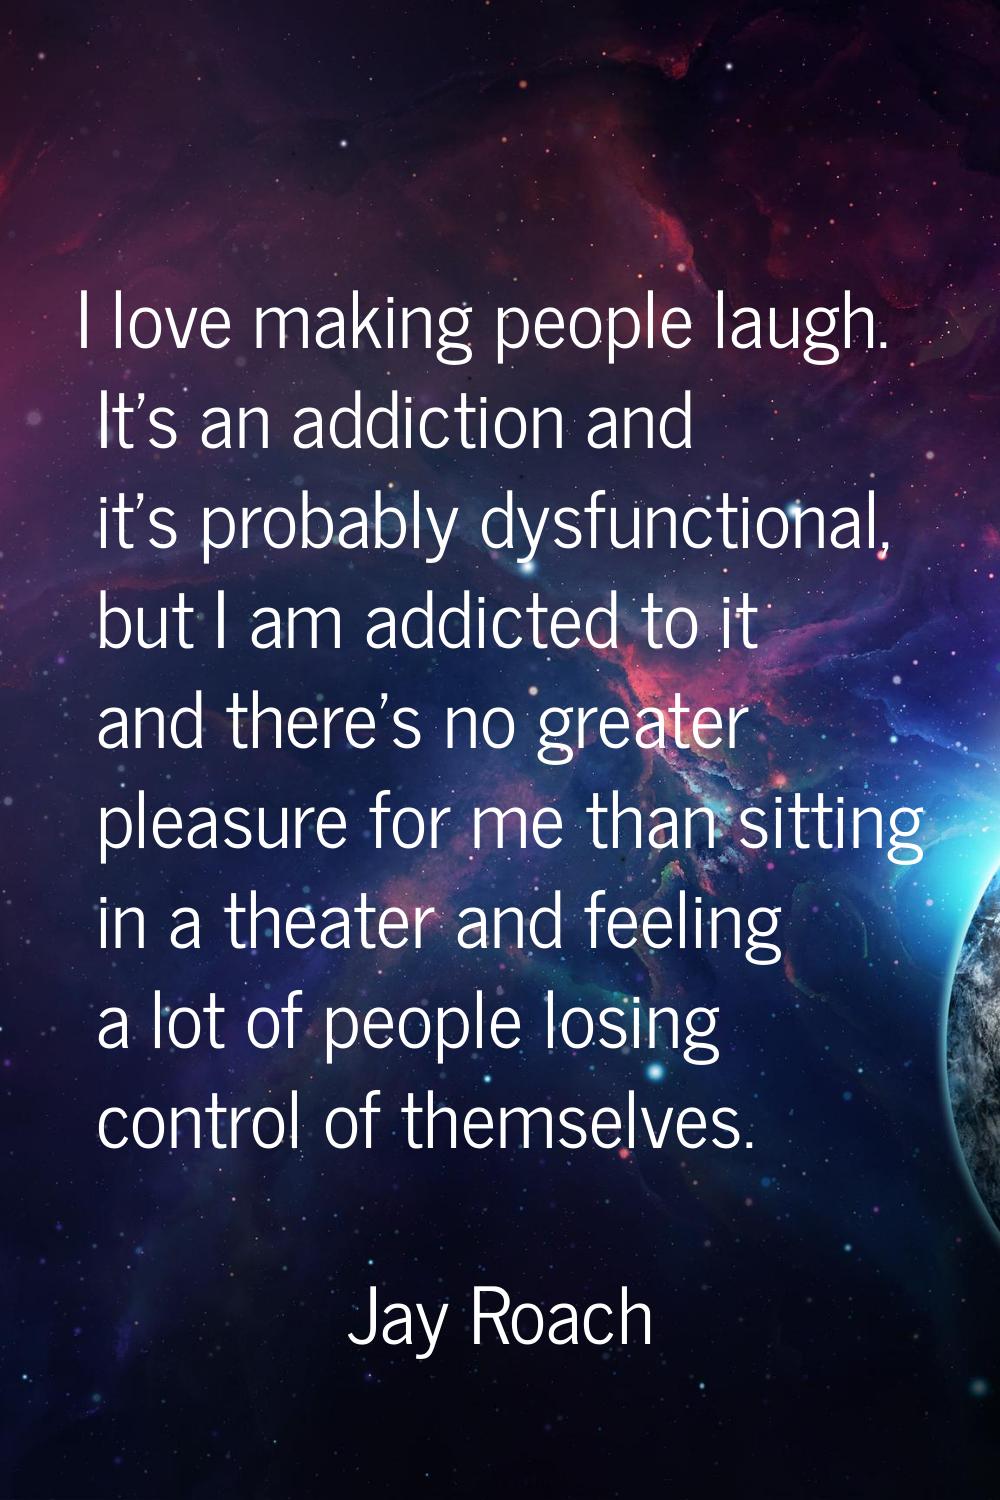 I love making people laugh. It's an addiction and it's probably dysfunctional, but I am addicted to